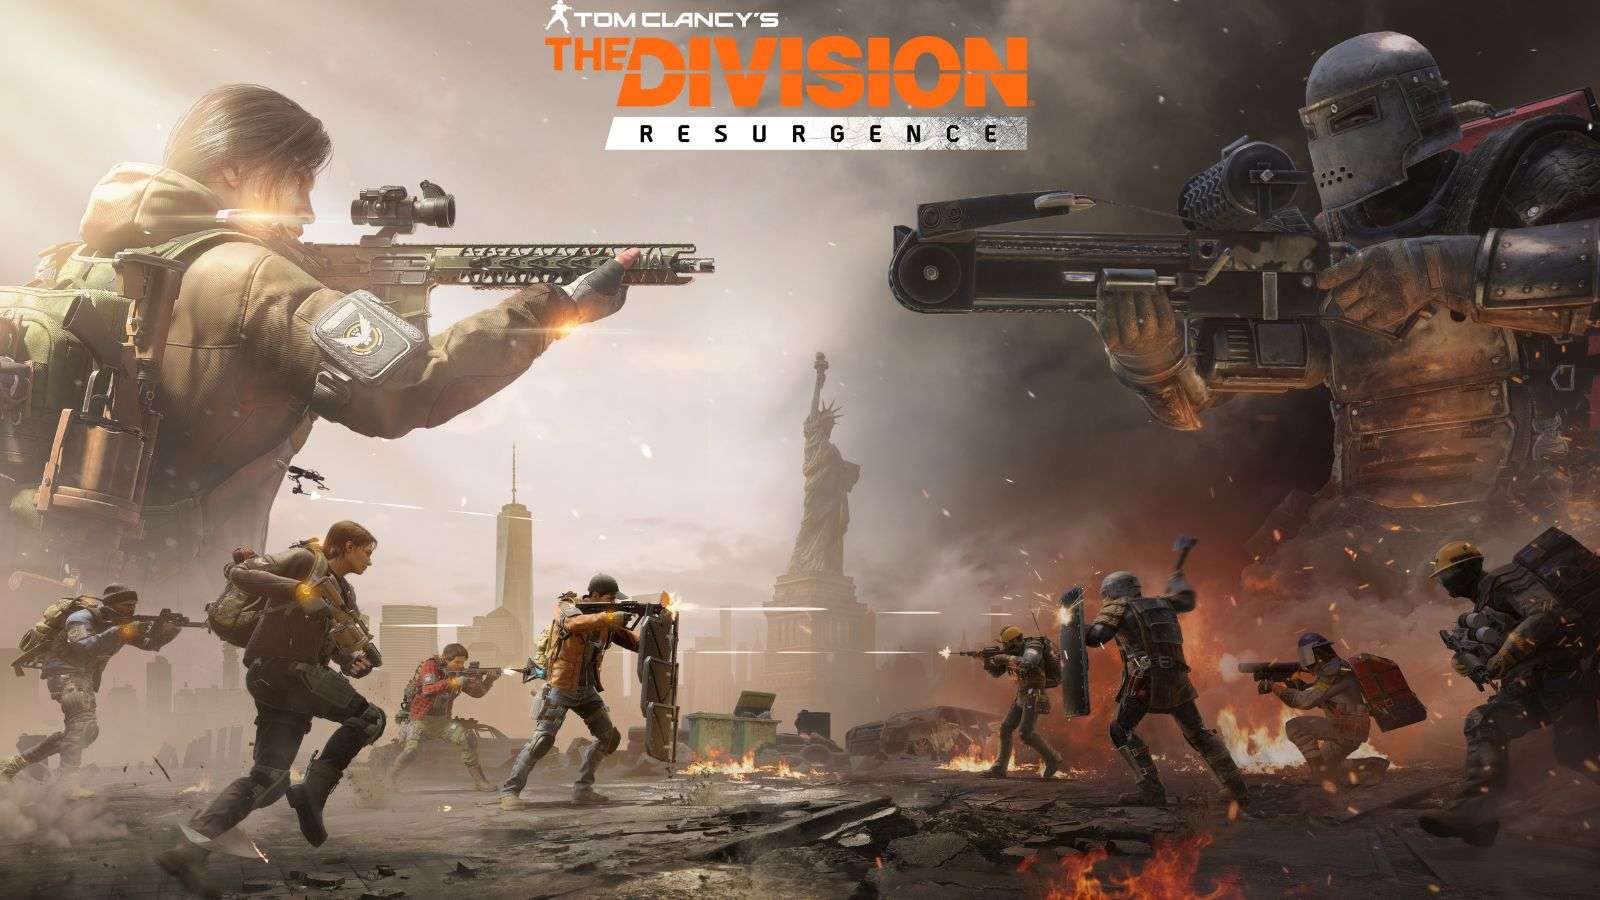 The Division Resurgence cover